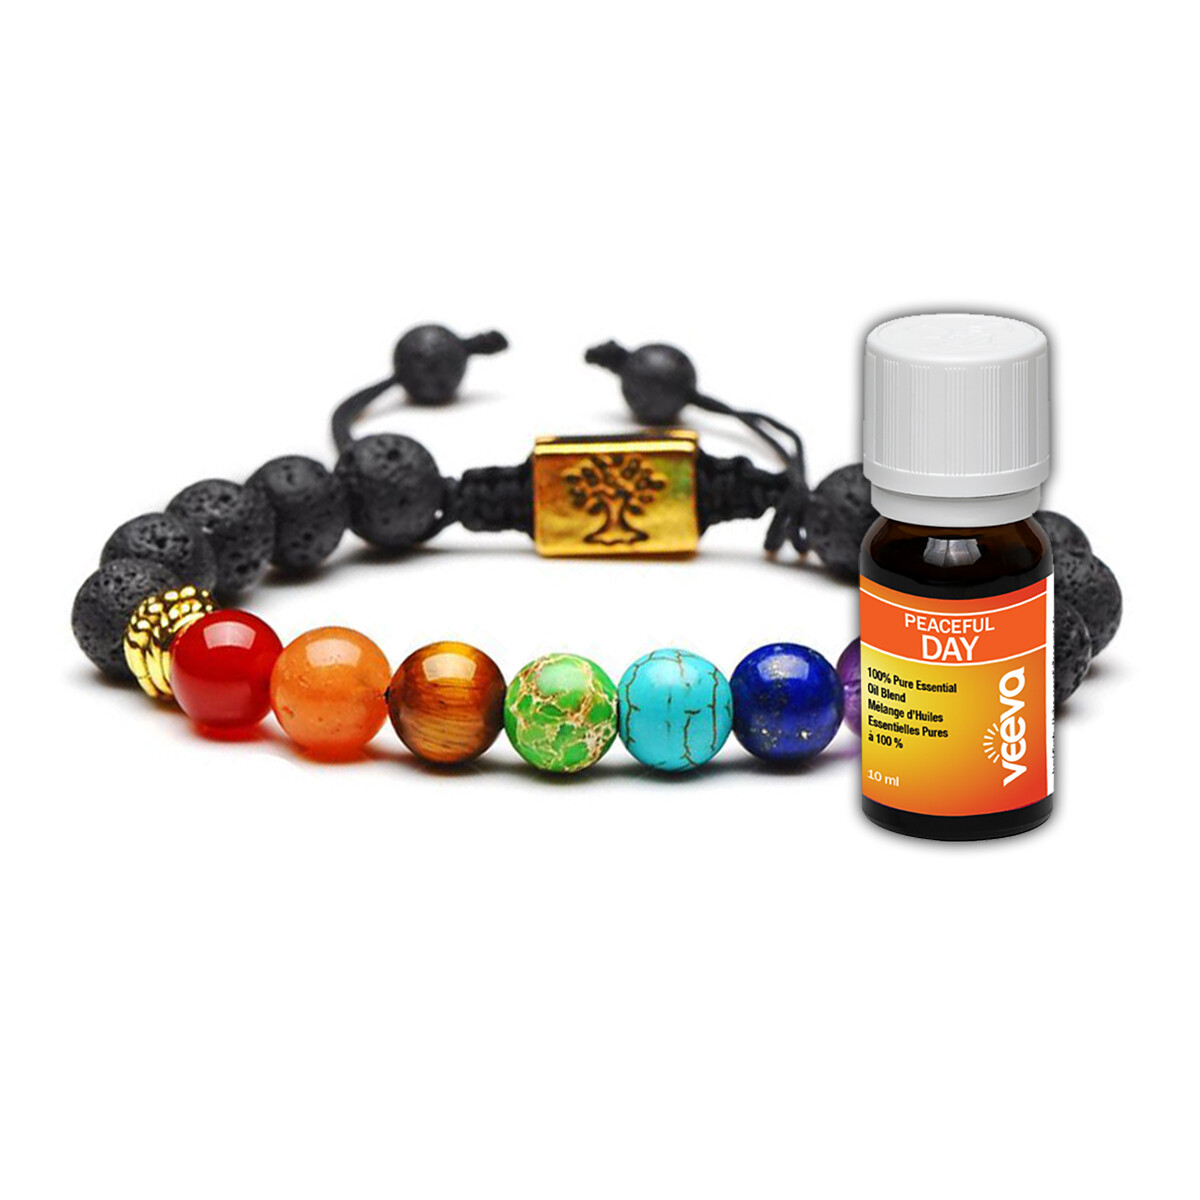 7 Chakra & Lava Stones Personal Aromatherapy Bracelet with Peaceful DAY Essential Oil Blend (2 models)